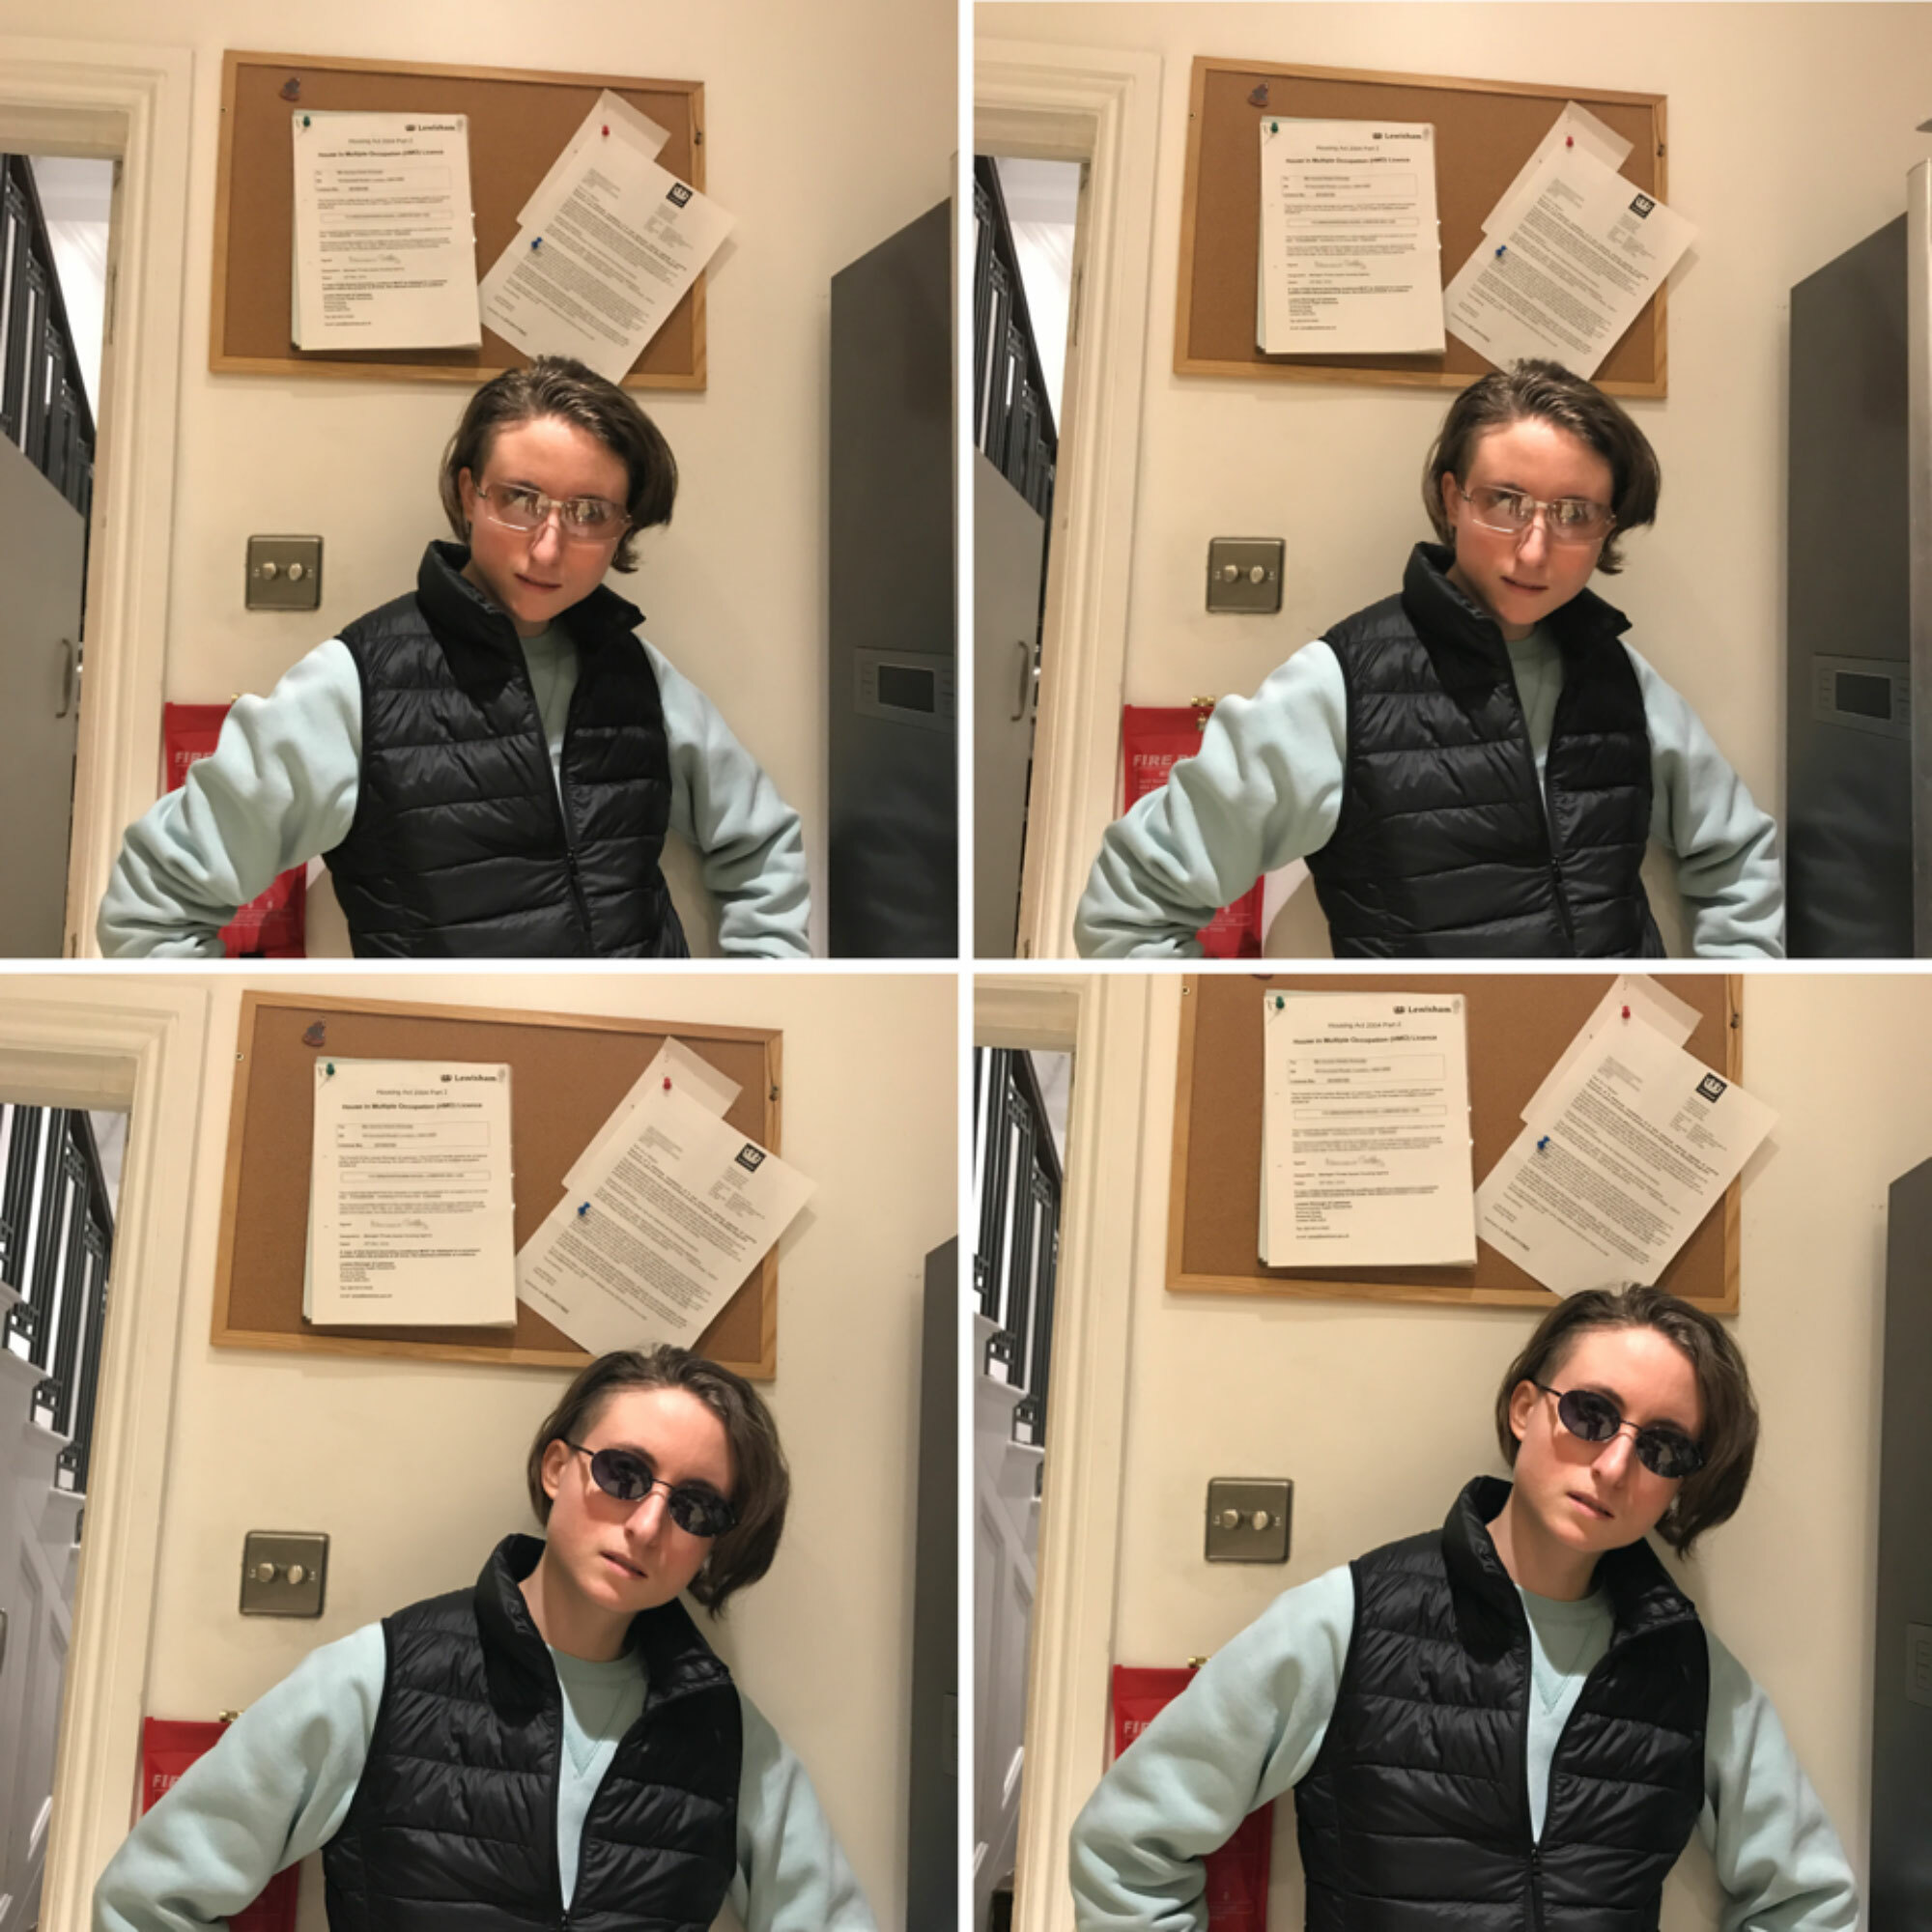 A person wearing a bodywarmer with sunglasses poses for four images.